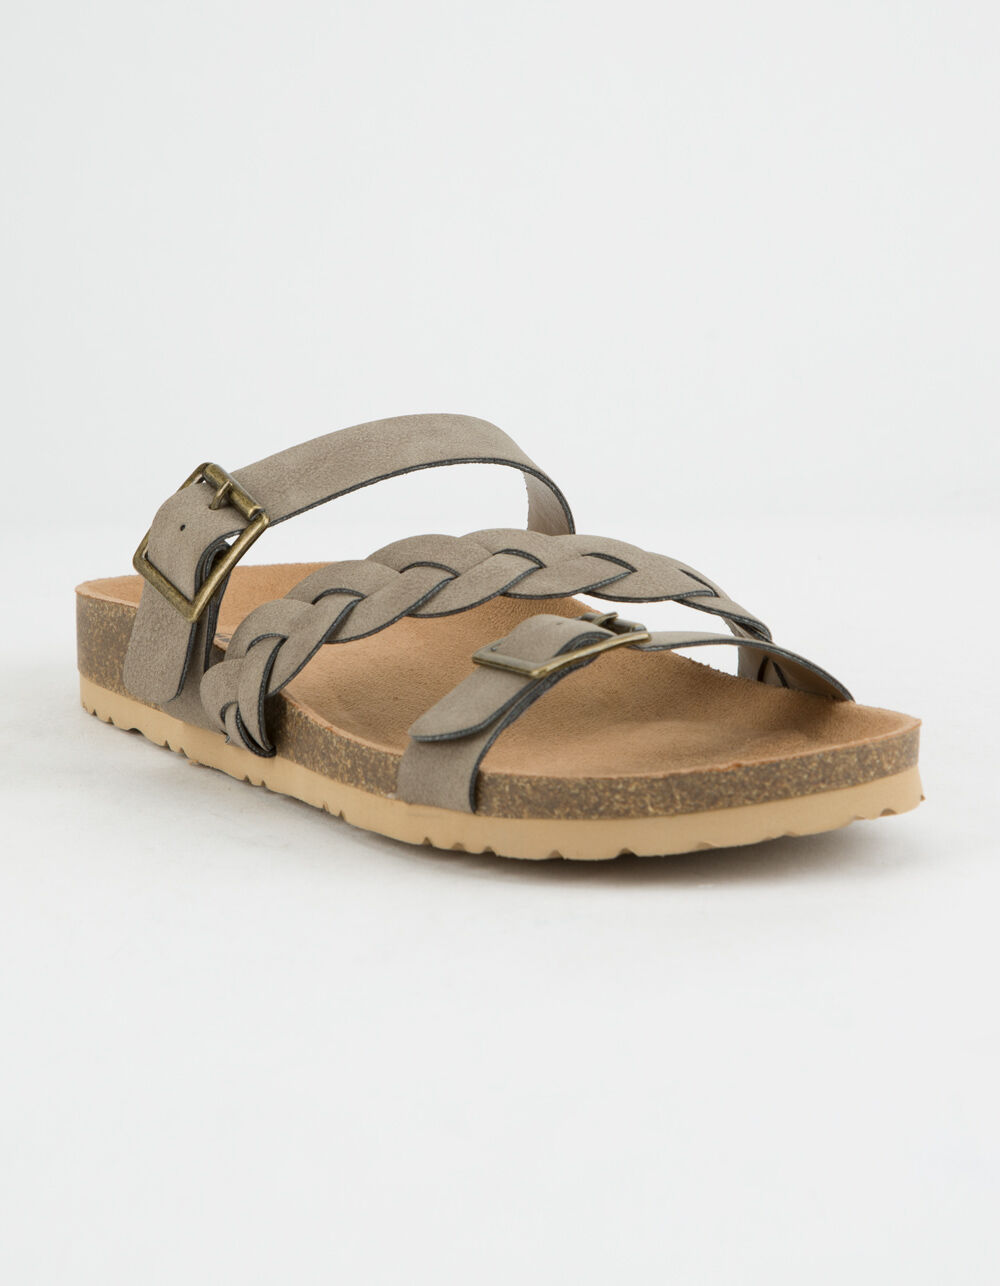 SODA BRAIDED STRAP BUCKLE TAUPE SANDALS